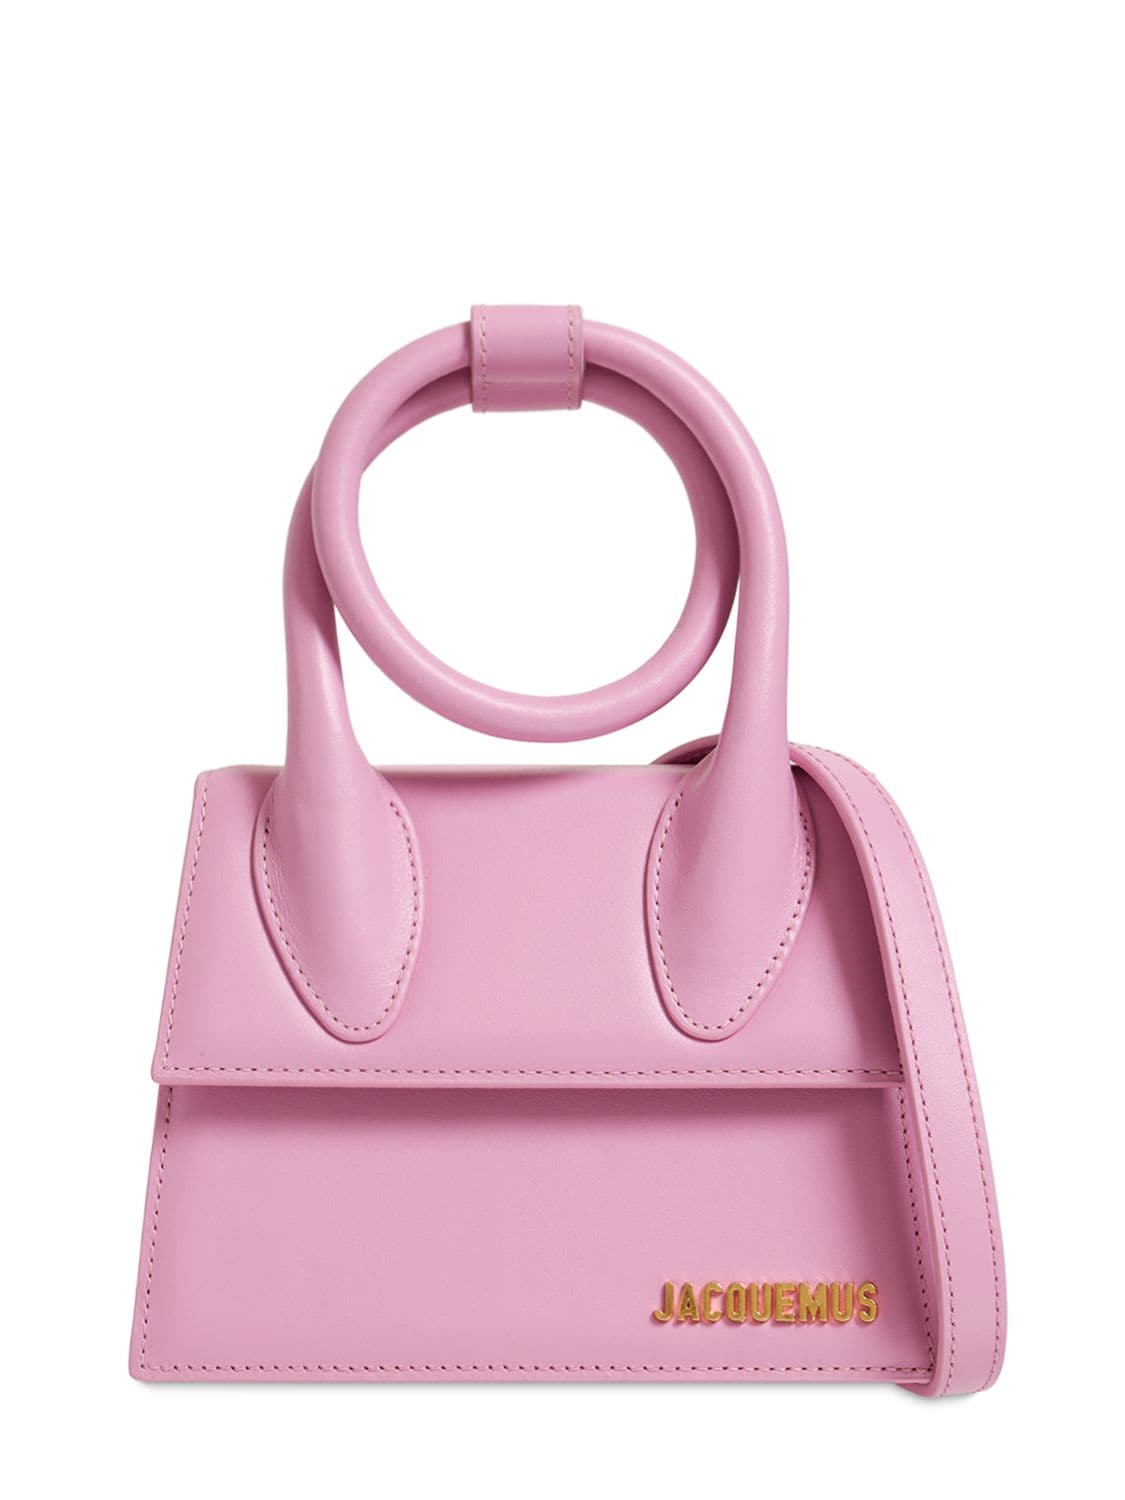 Jacquemus Le Chiquito Noeud Leather Shoulder Bag In Light Pink | ModeSens